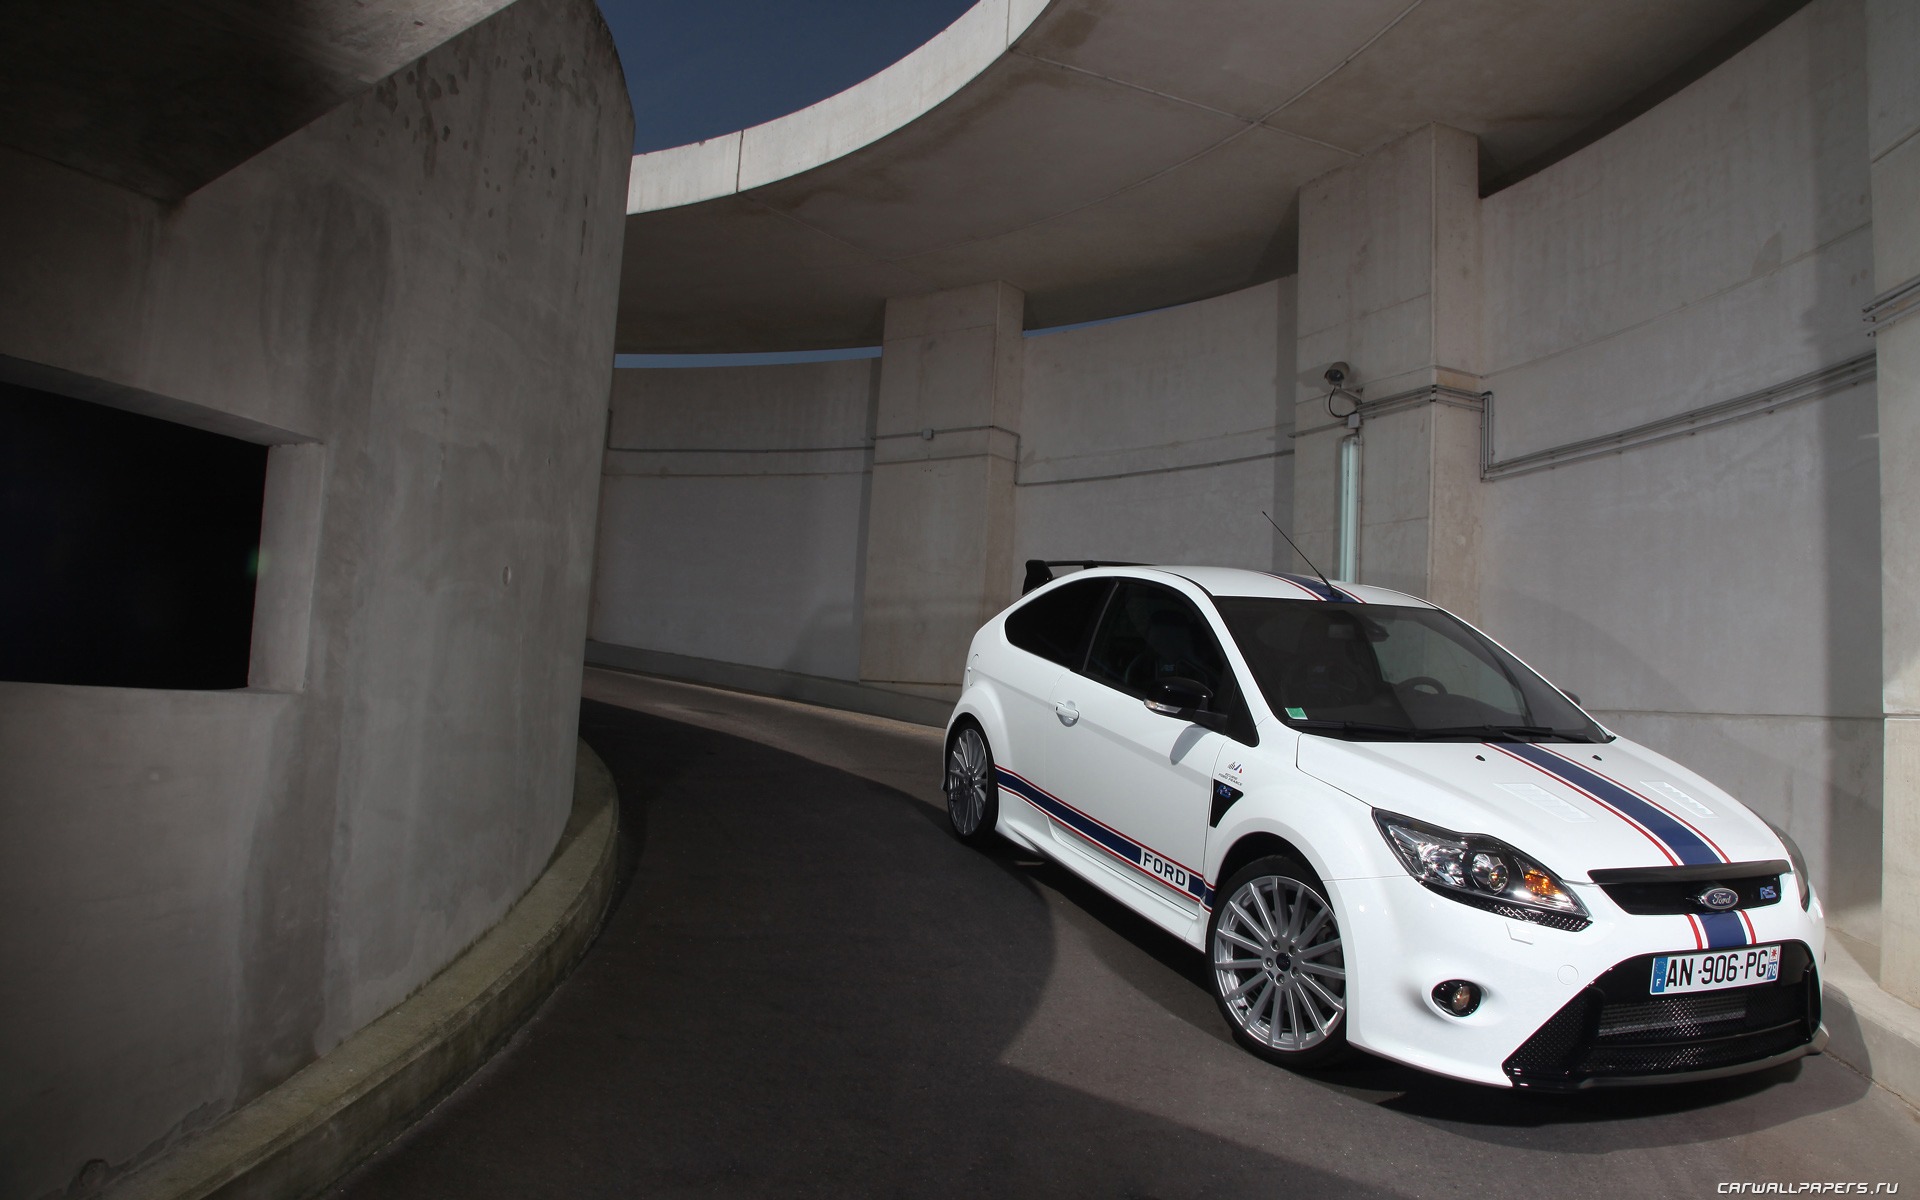 Ford Focus RS Le Mans Classic - 2010 福特7 - 1920x1200